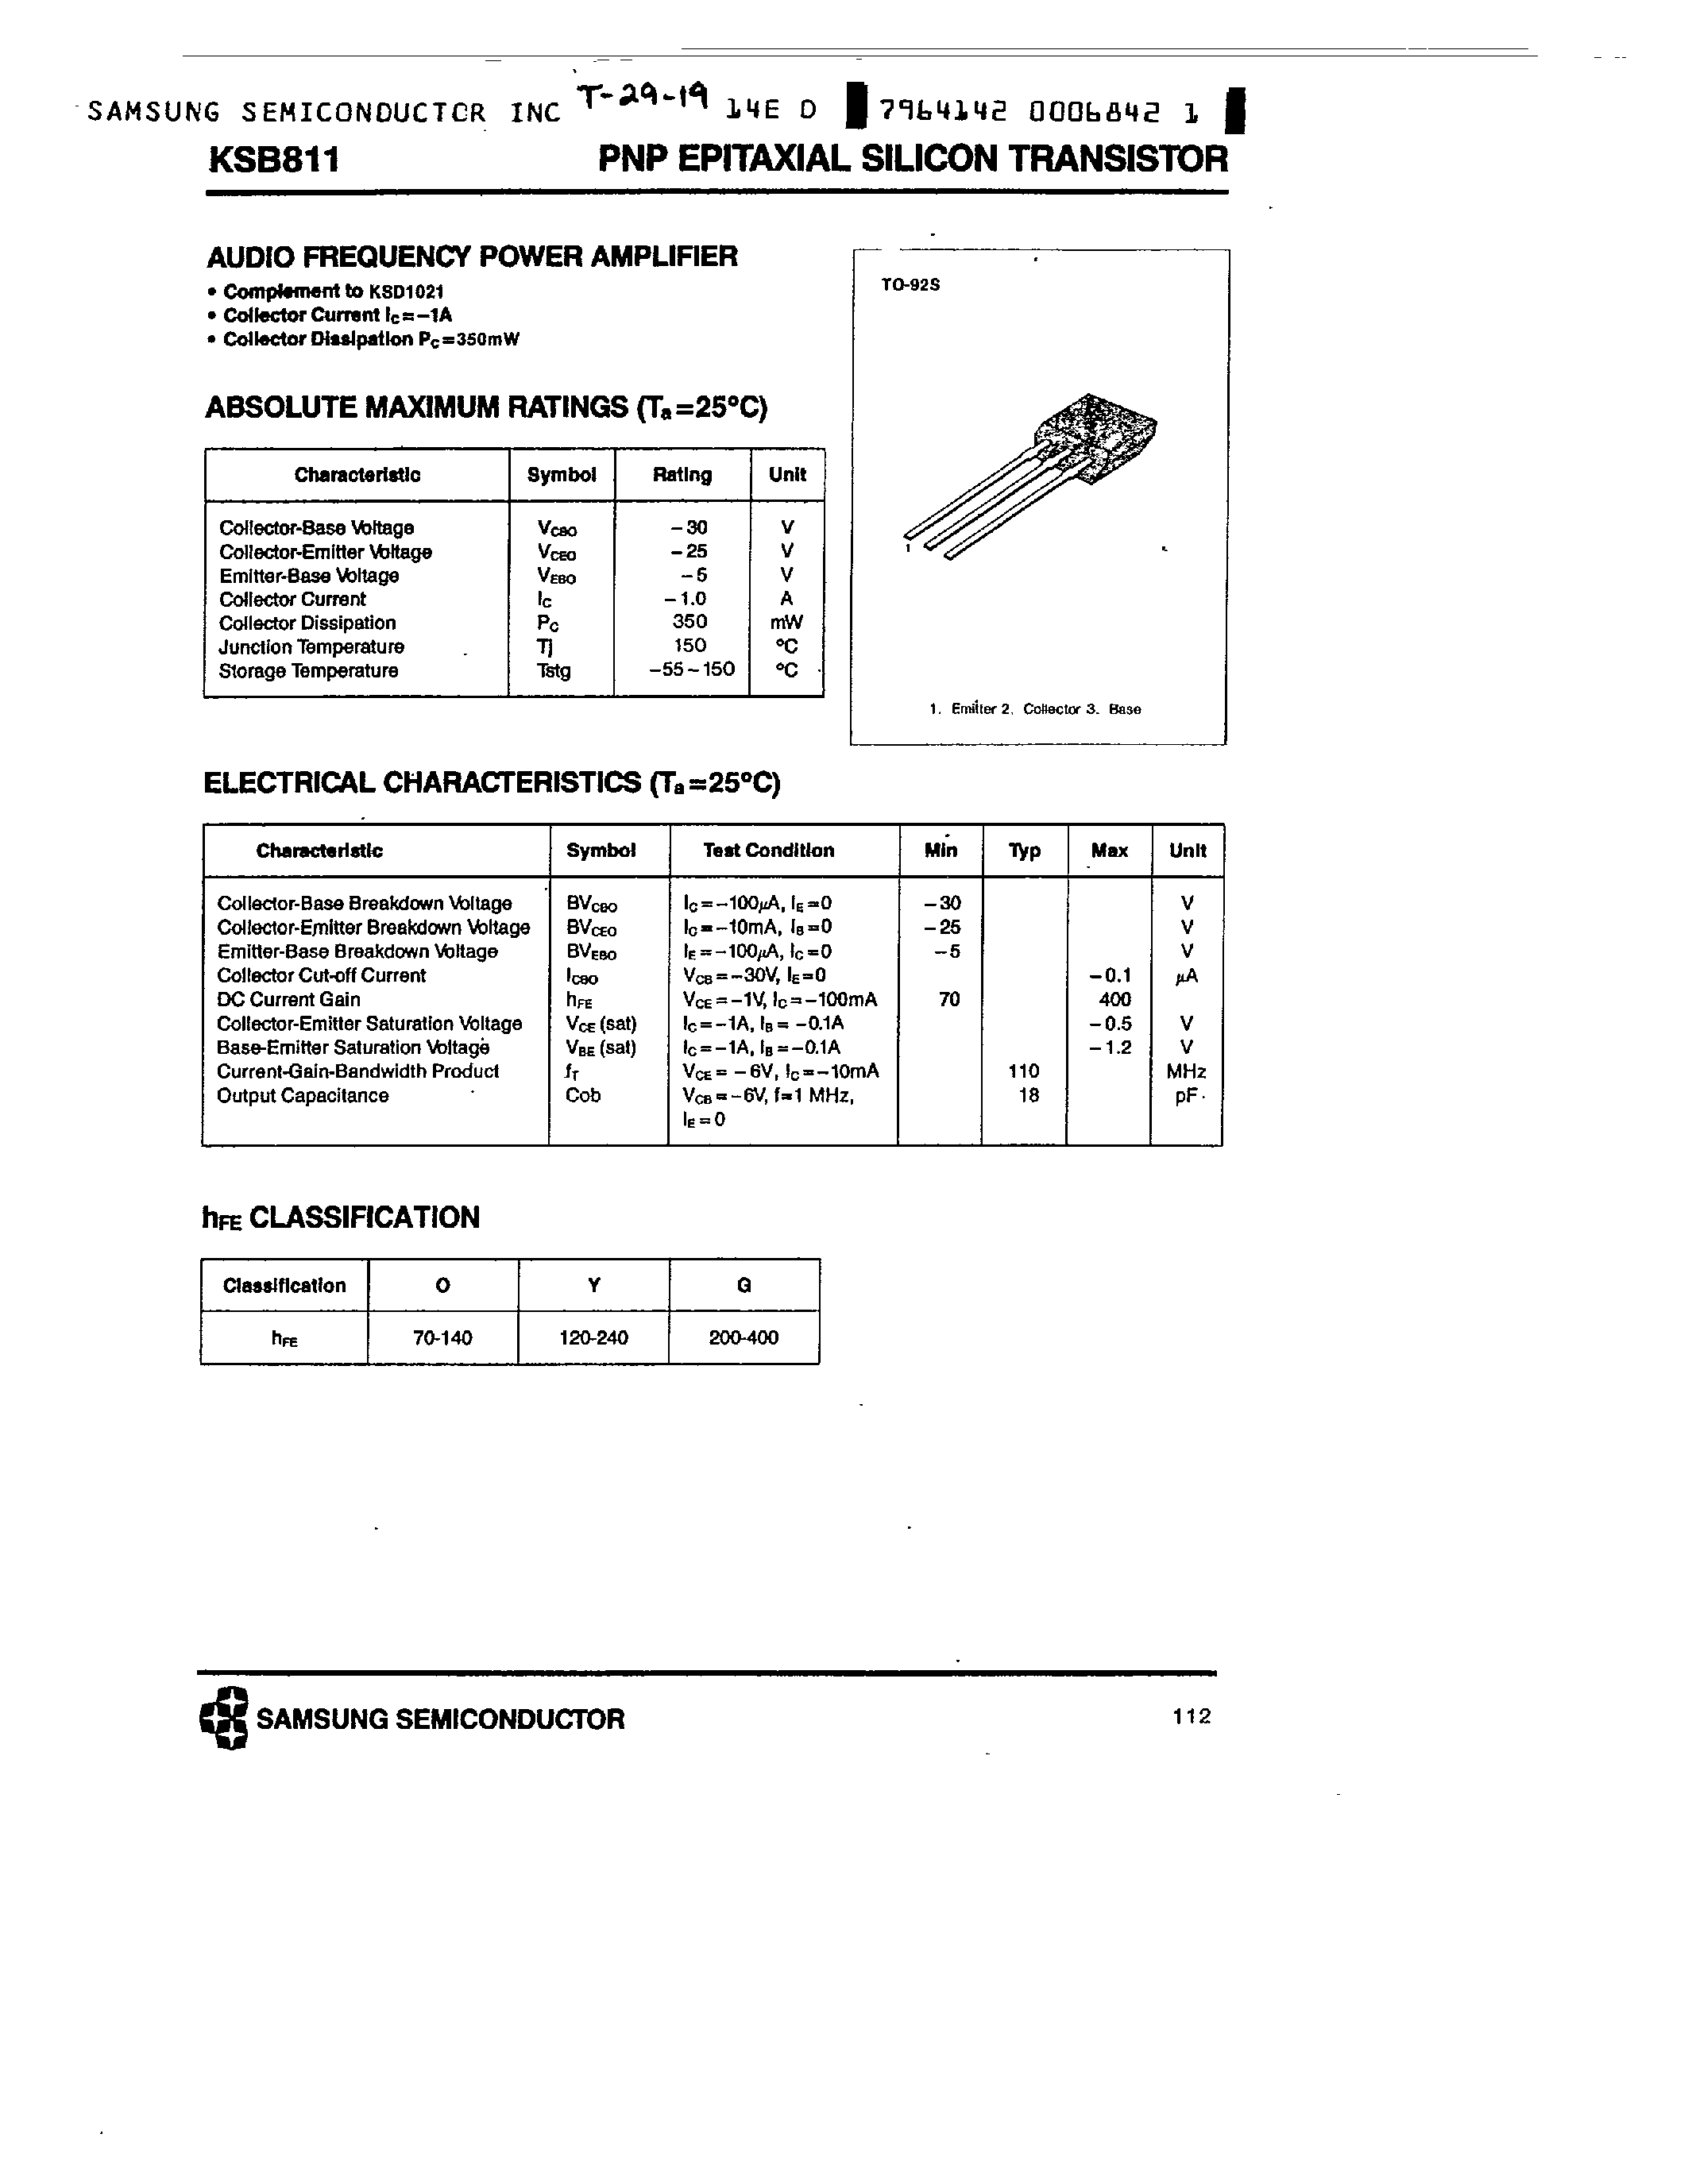 Datasheet KSB811 - PNP (AUDIO FREQUENCY POWER AMPLIFIER) page 1